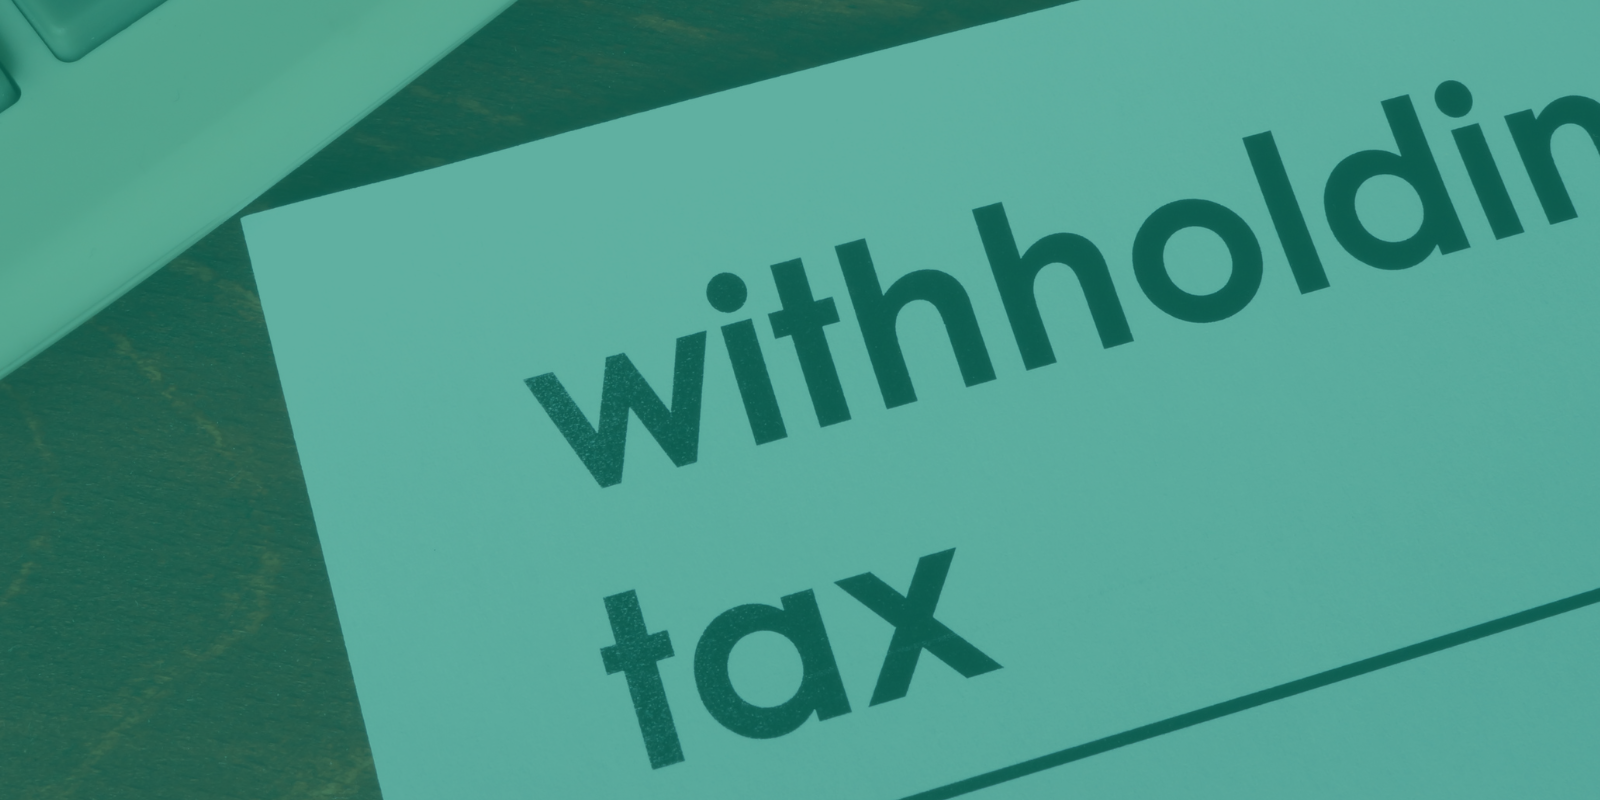 Differences In Withholding Tax Reporting Between Saudi Arabia And Other Jurisdictions